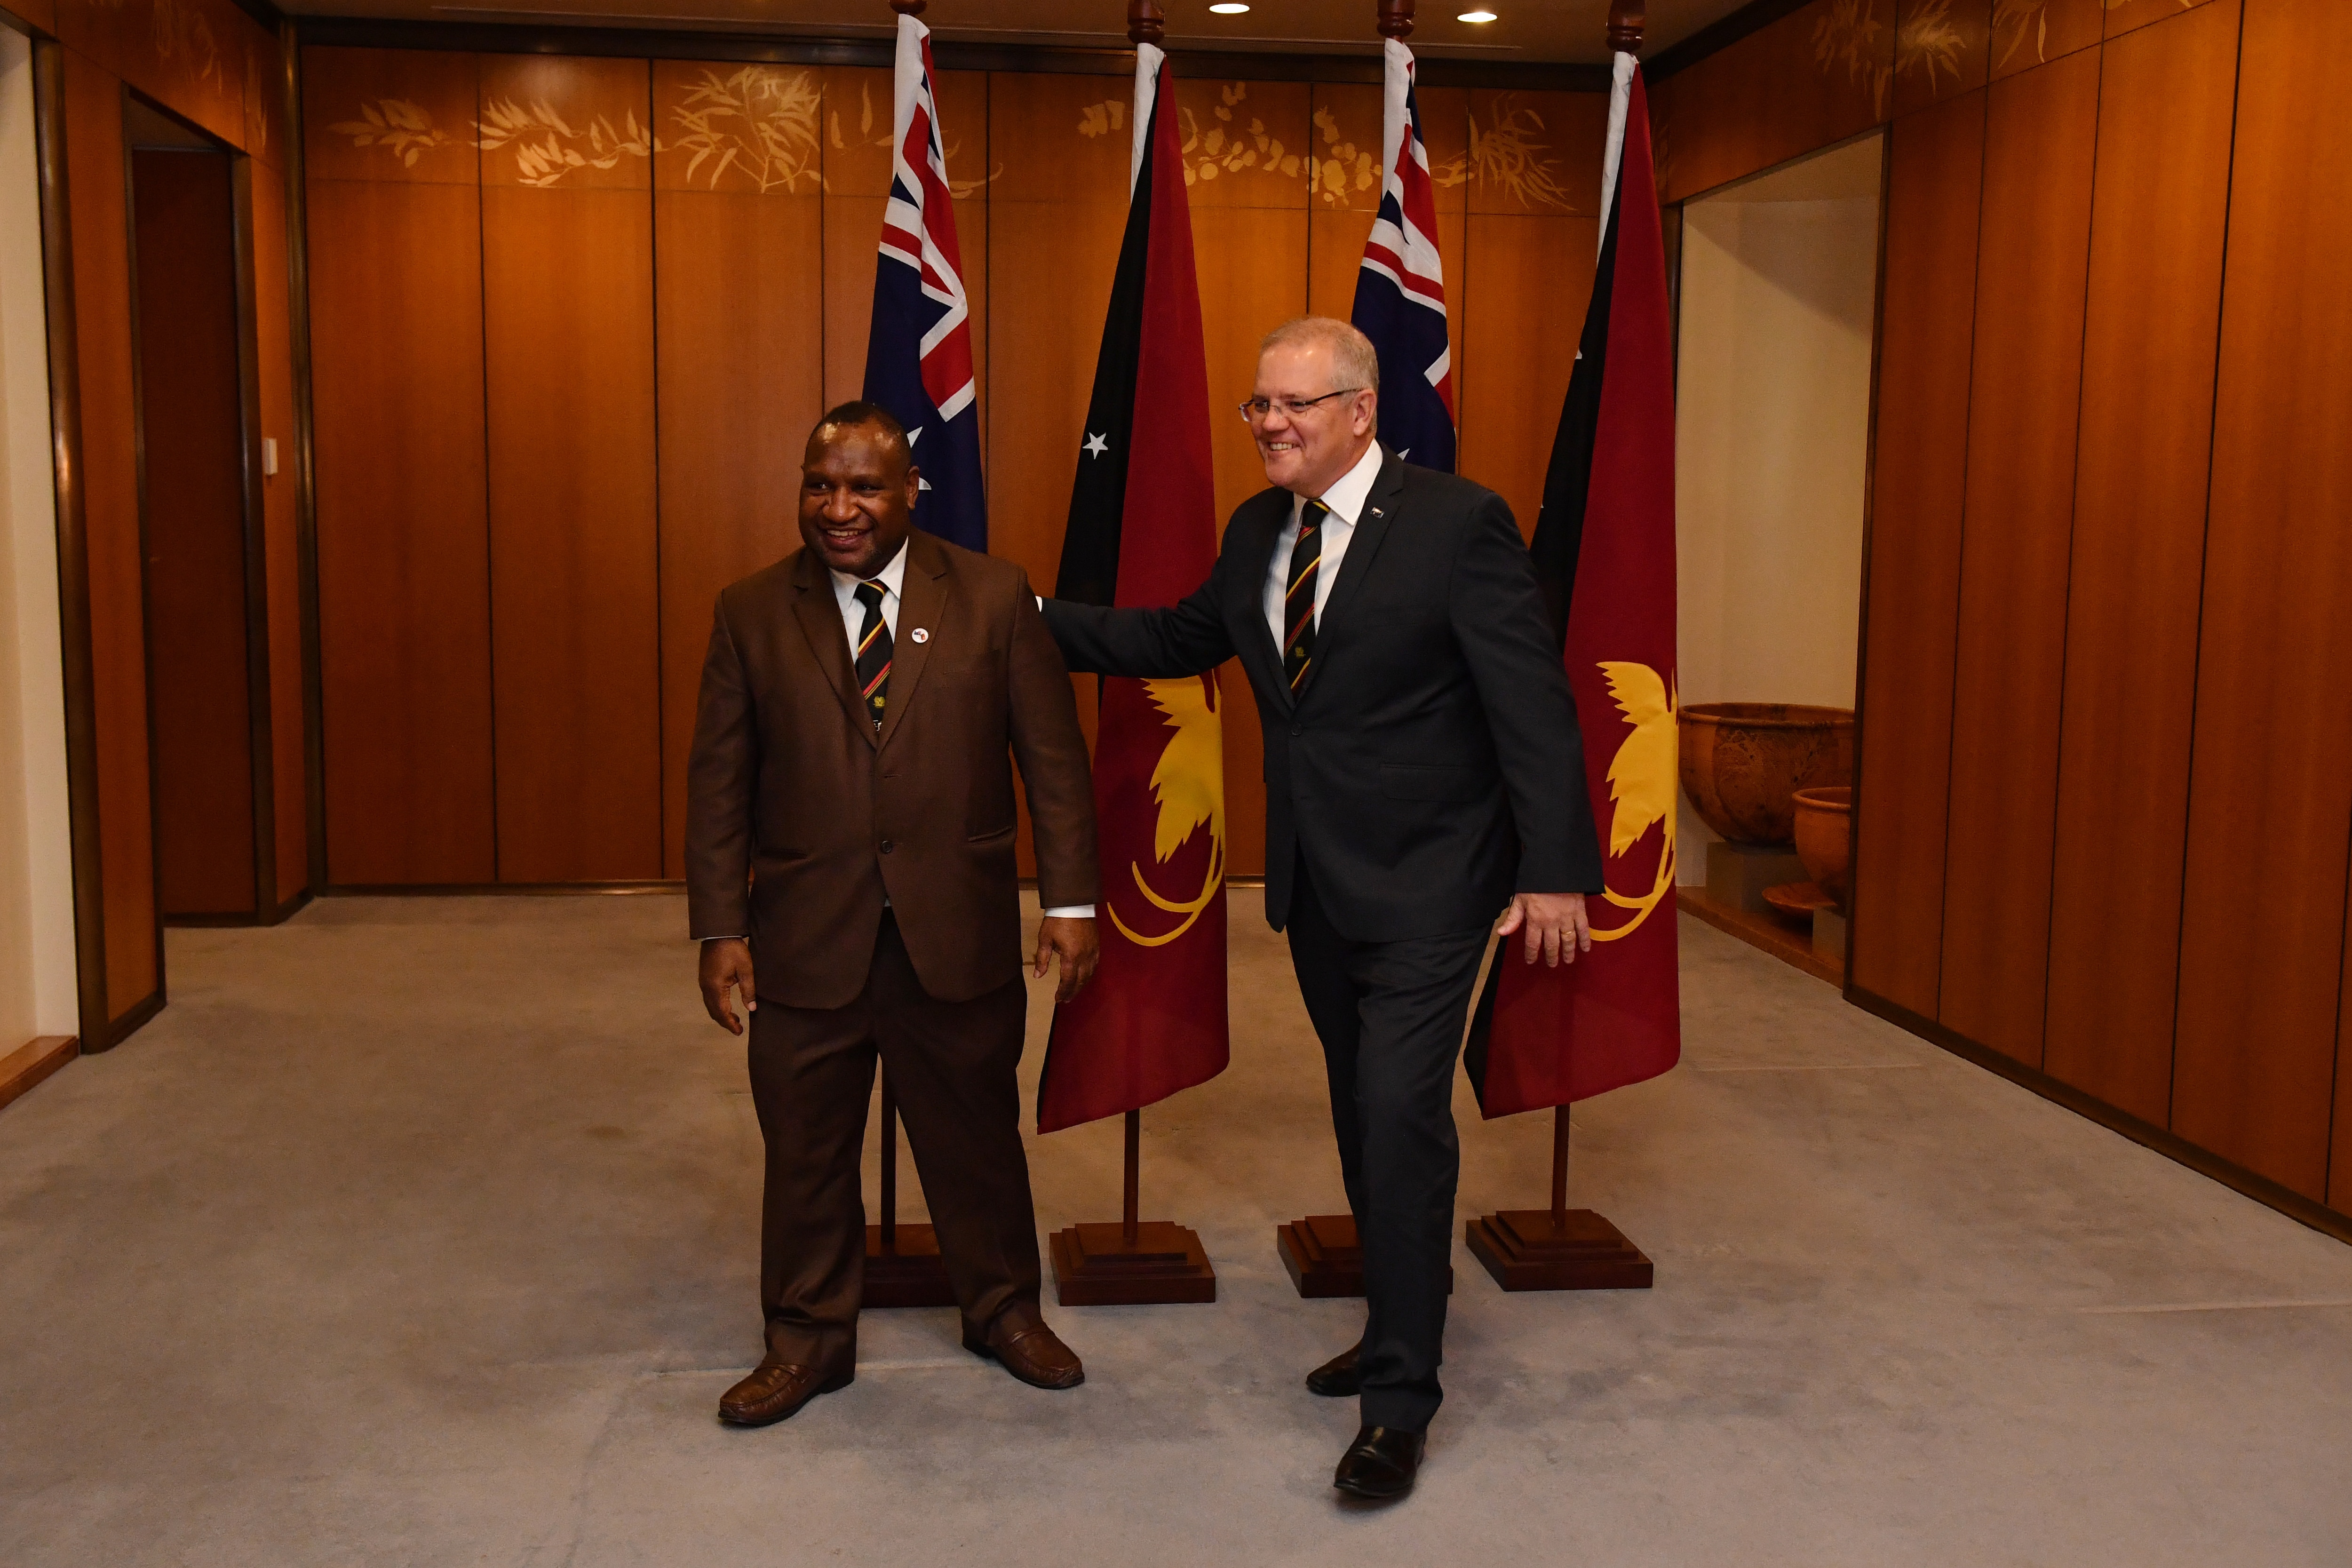 Prime Minister Scott Morrison and Papua New Guinea's Prime Minister James Marape at Parliament House in Canberra, Monday, July 22, 2019. (AAP Image/Mick Tsikas) NO ARCHIVING